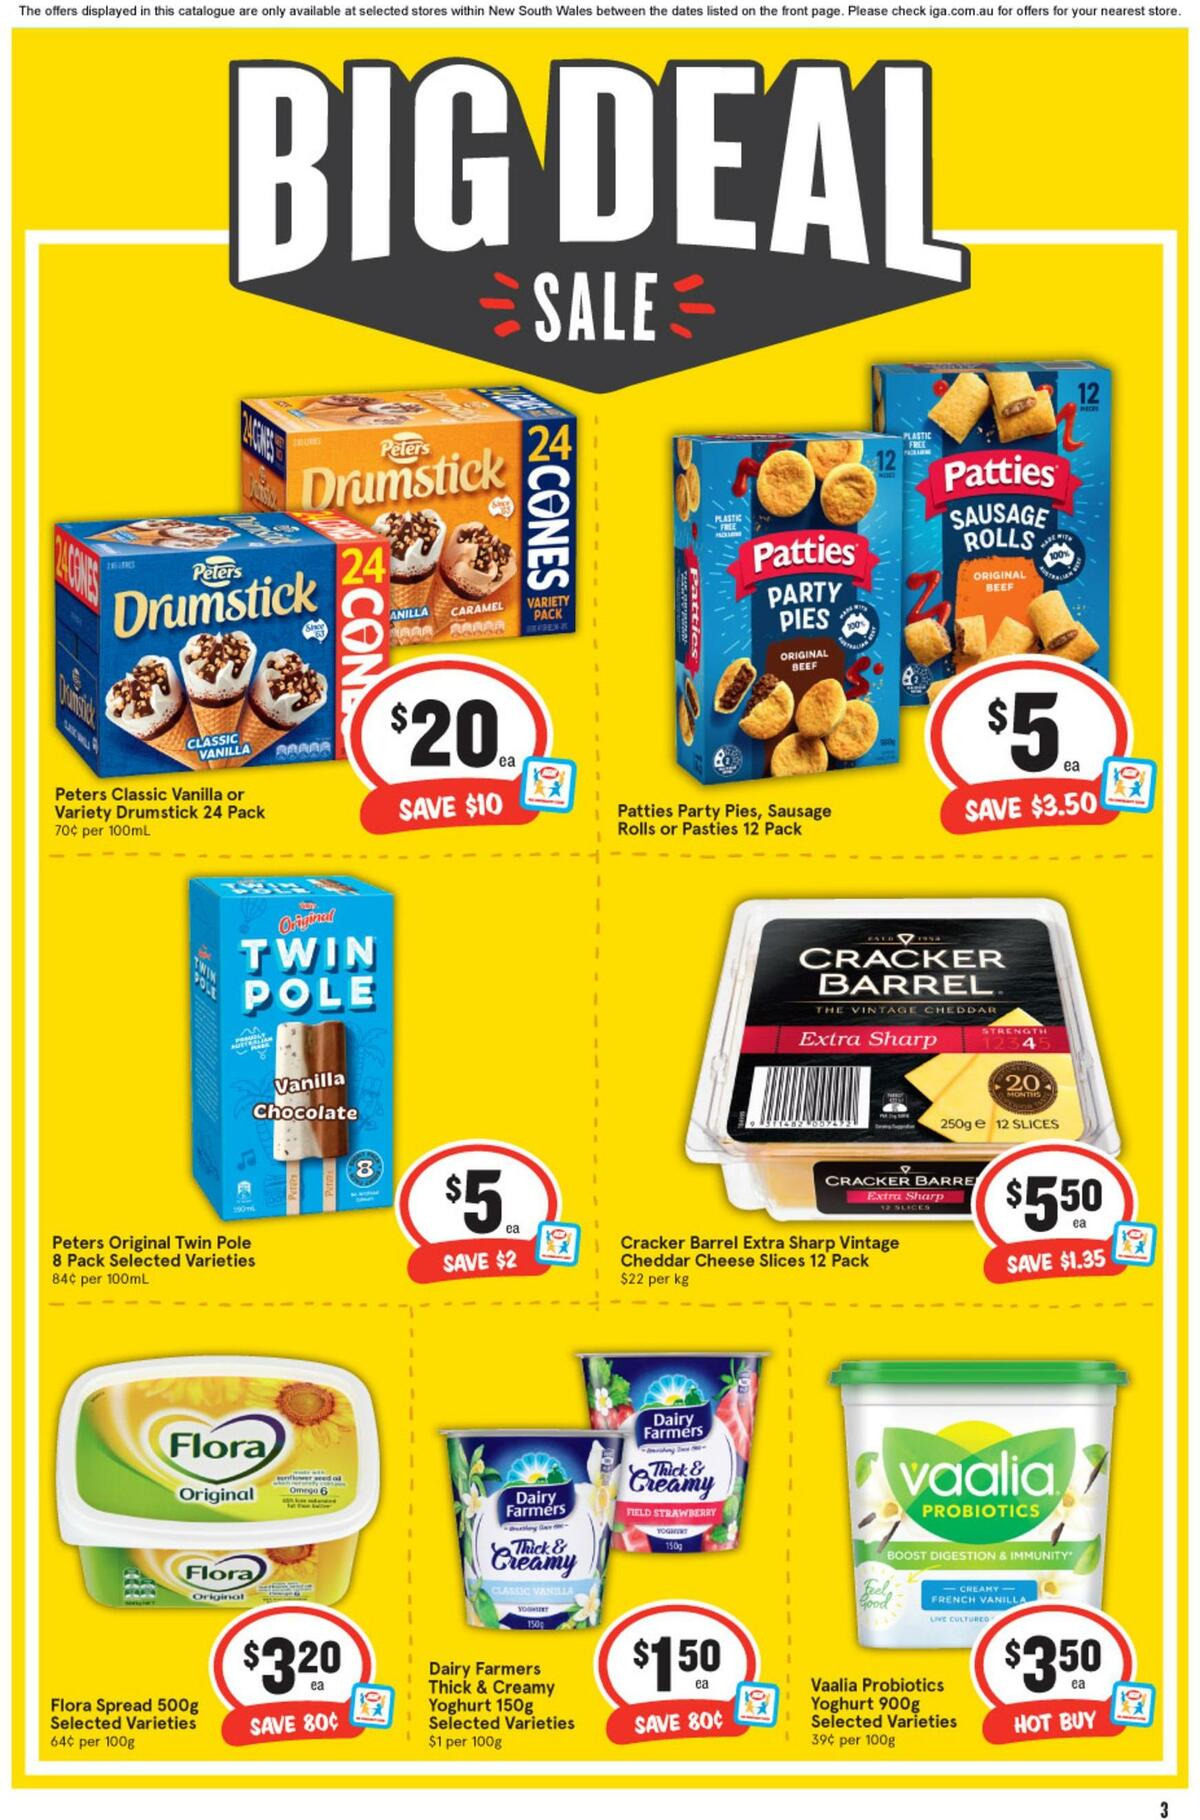 IGA Catalogues from 16 March